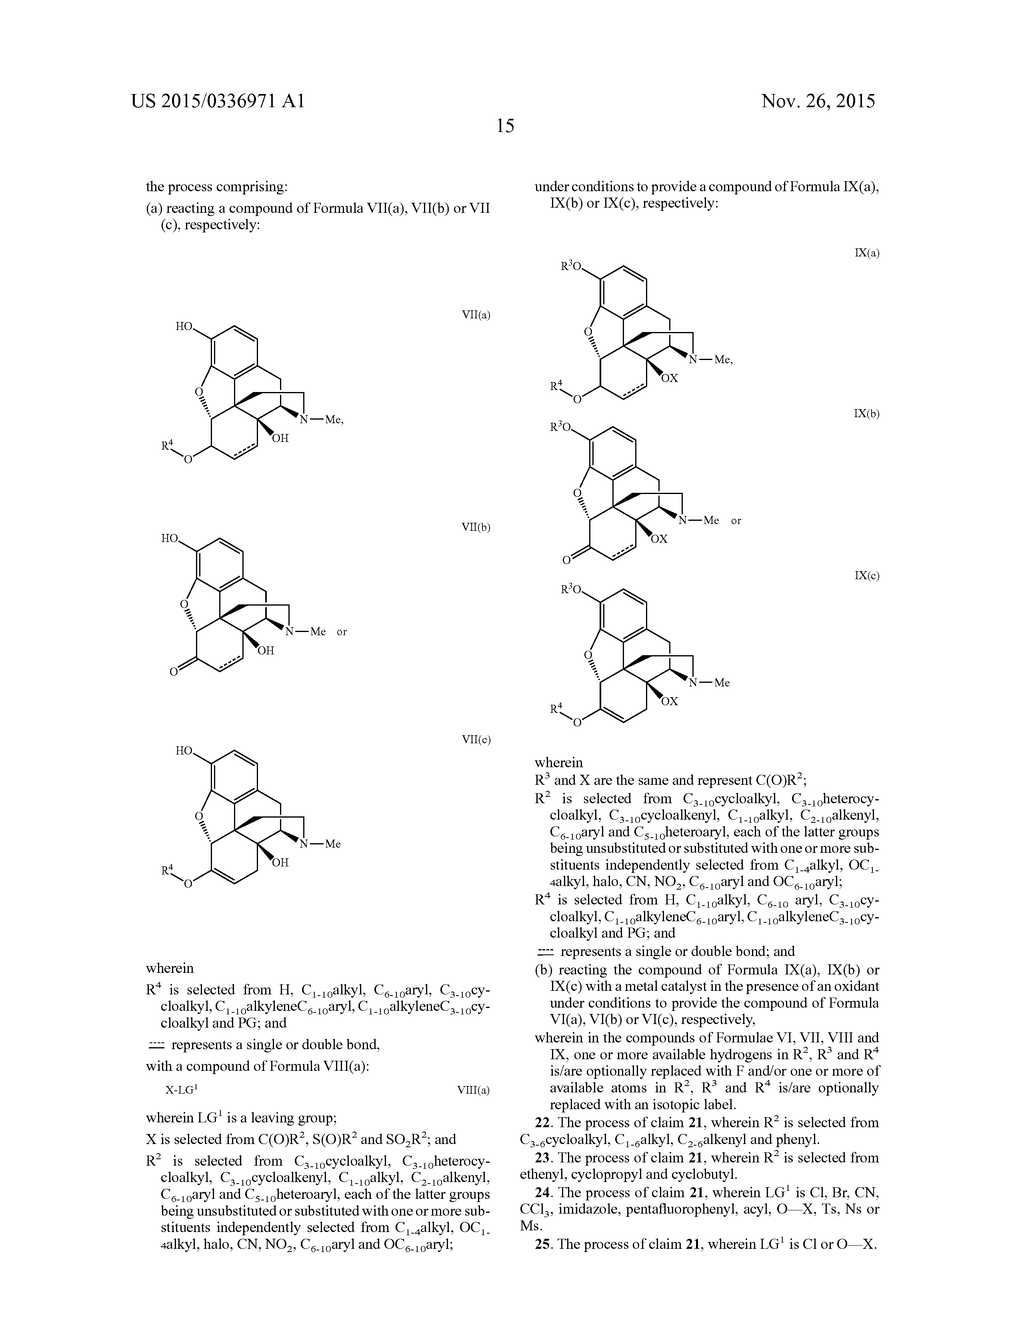 PROCESS FOR THE PREPARATION OF MORPHINE ANALOGS VIA METAL CATALYZED     N-DEMETHYLATION/FUNCTIONALIZATION AND INTRAMOLECULAR GROUP TRANSFER - diagram, schematic, and image 16